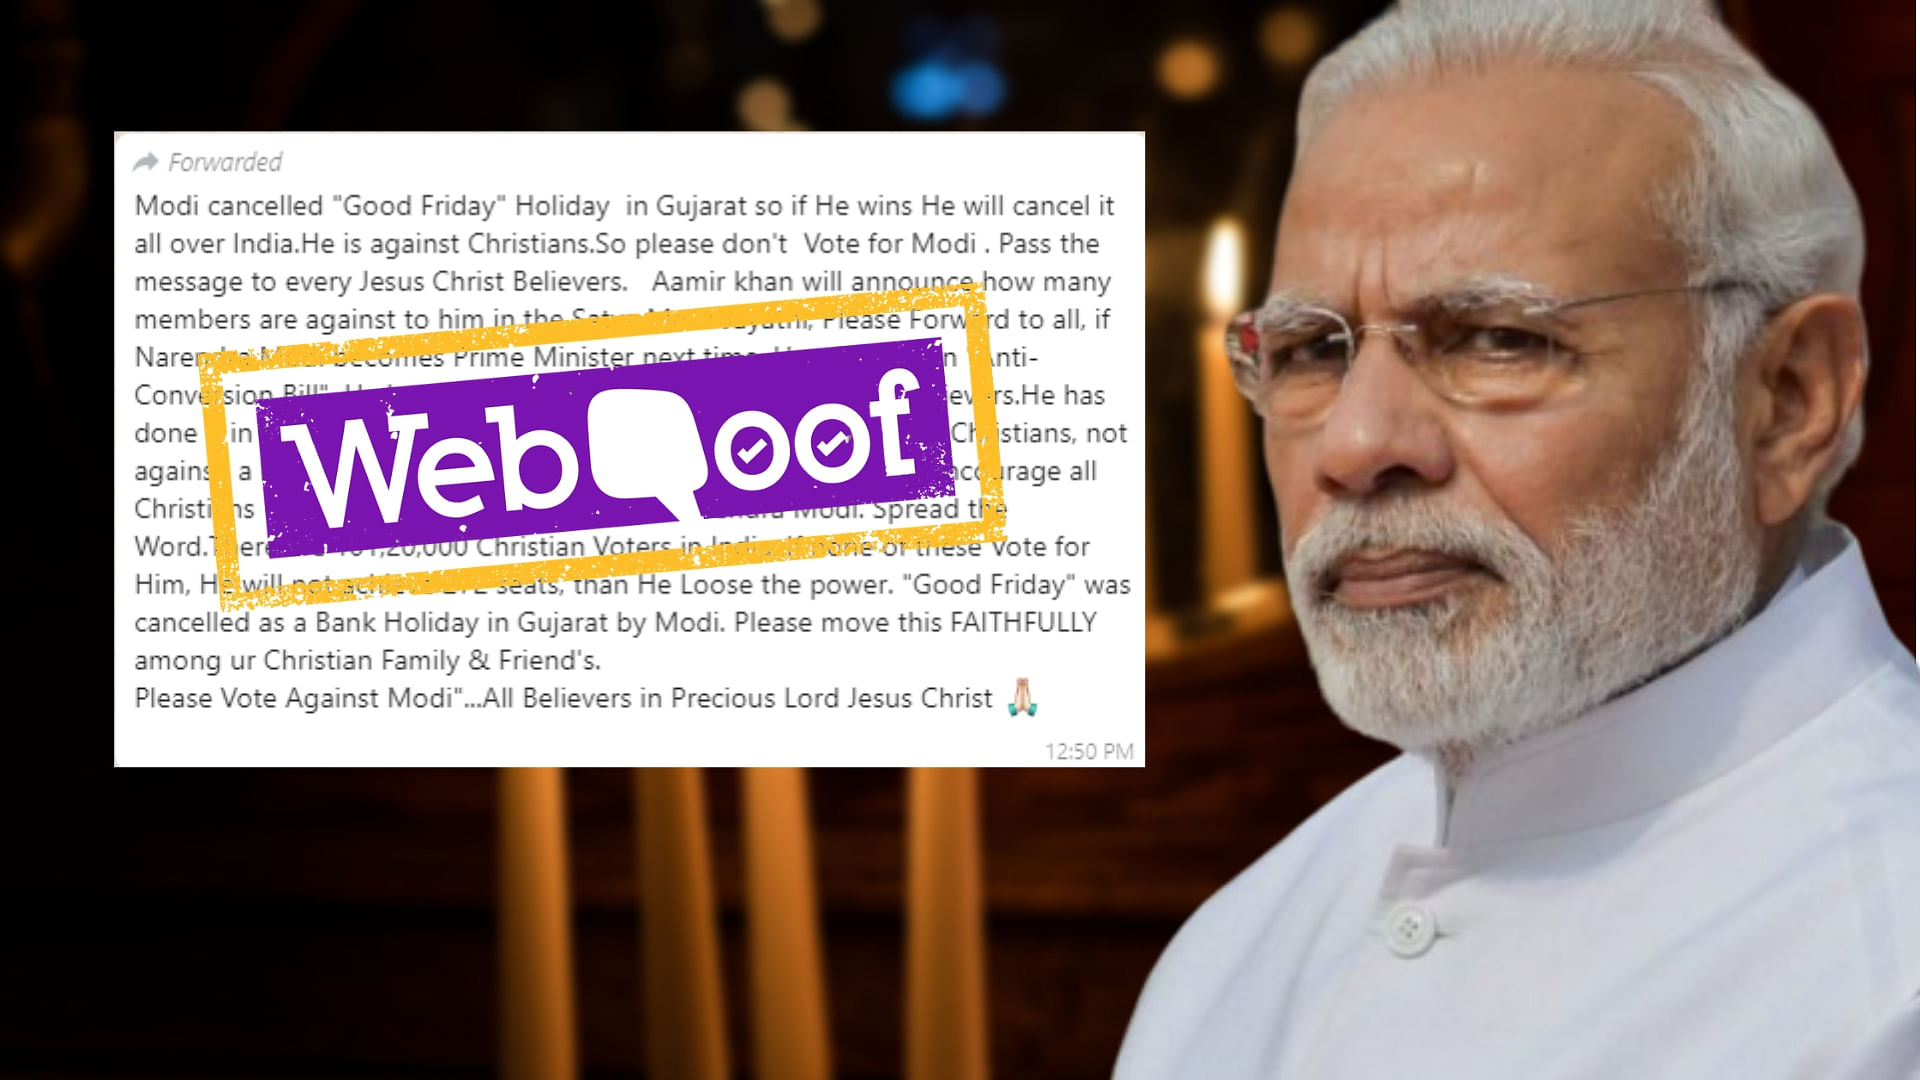 A viral WhatsApp forward claims that Narendra Modi, as the CM of Gujarat, had cancelled Good Friday holiday in the state.